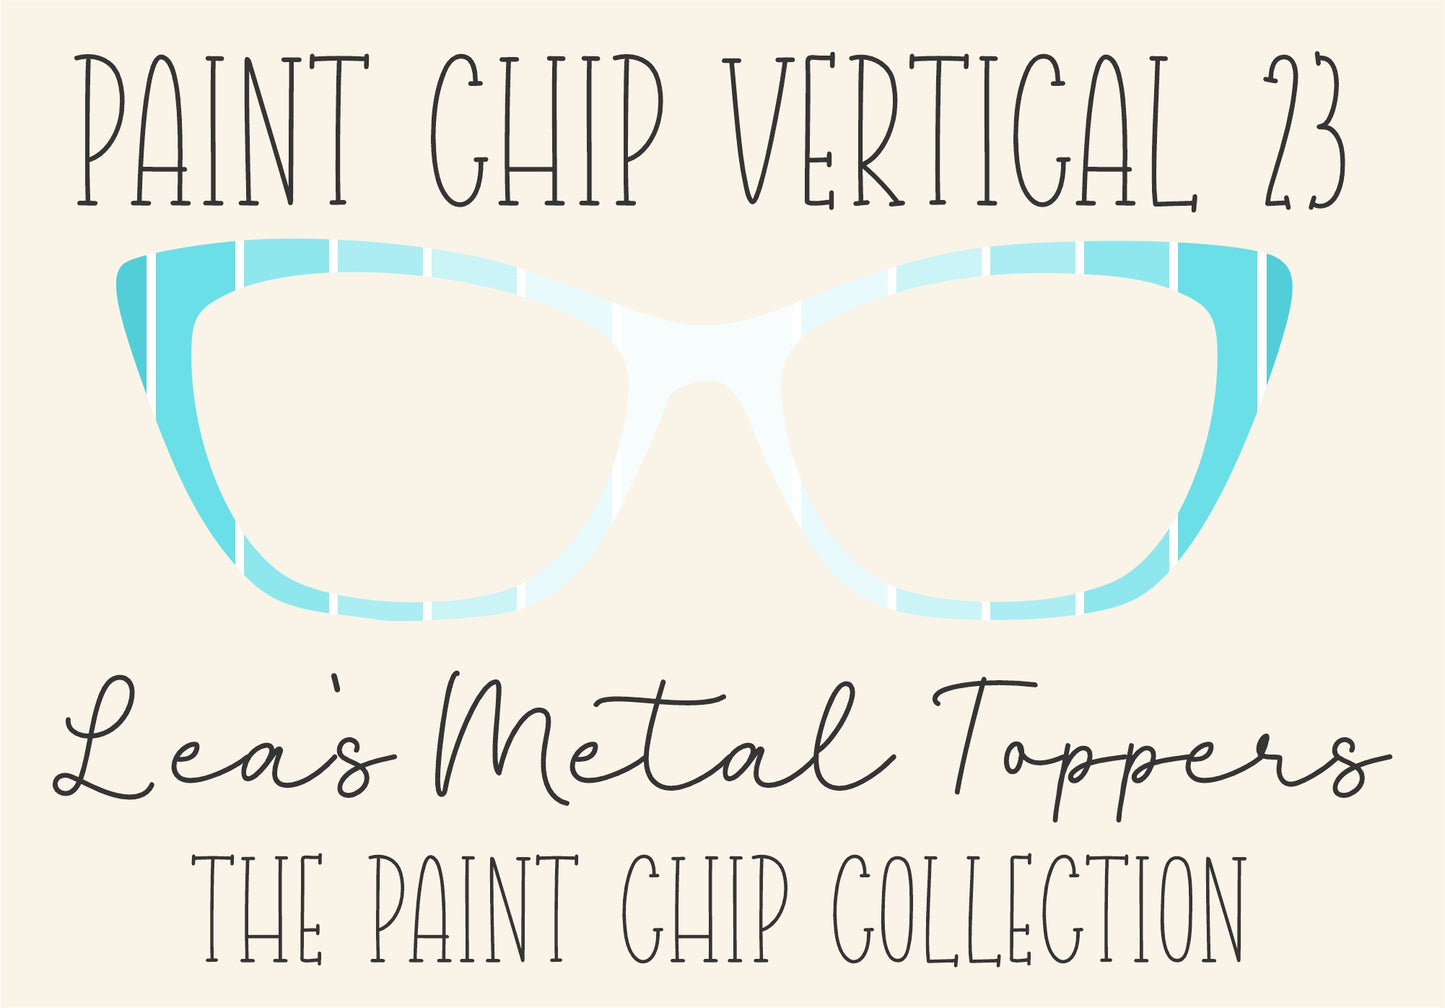 PAINT CHIP VERTICAL 23 Eyewear Frame Toppers COMES WITH MAGNETS